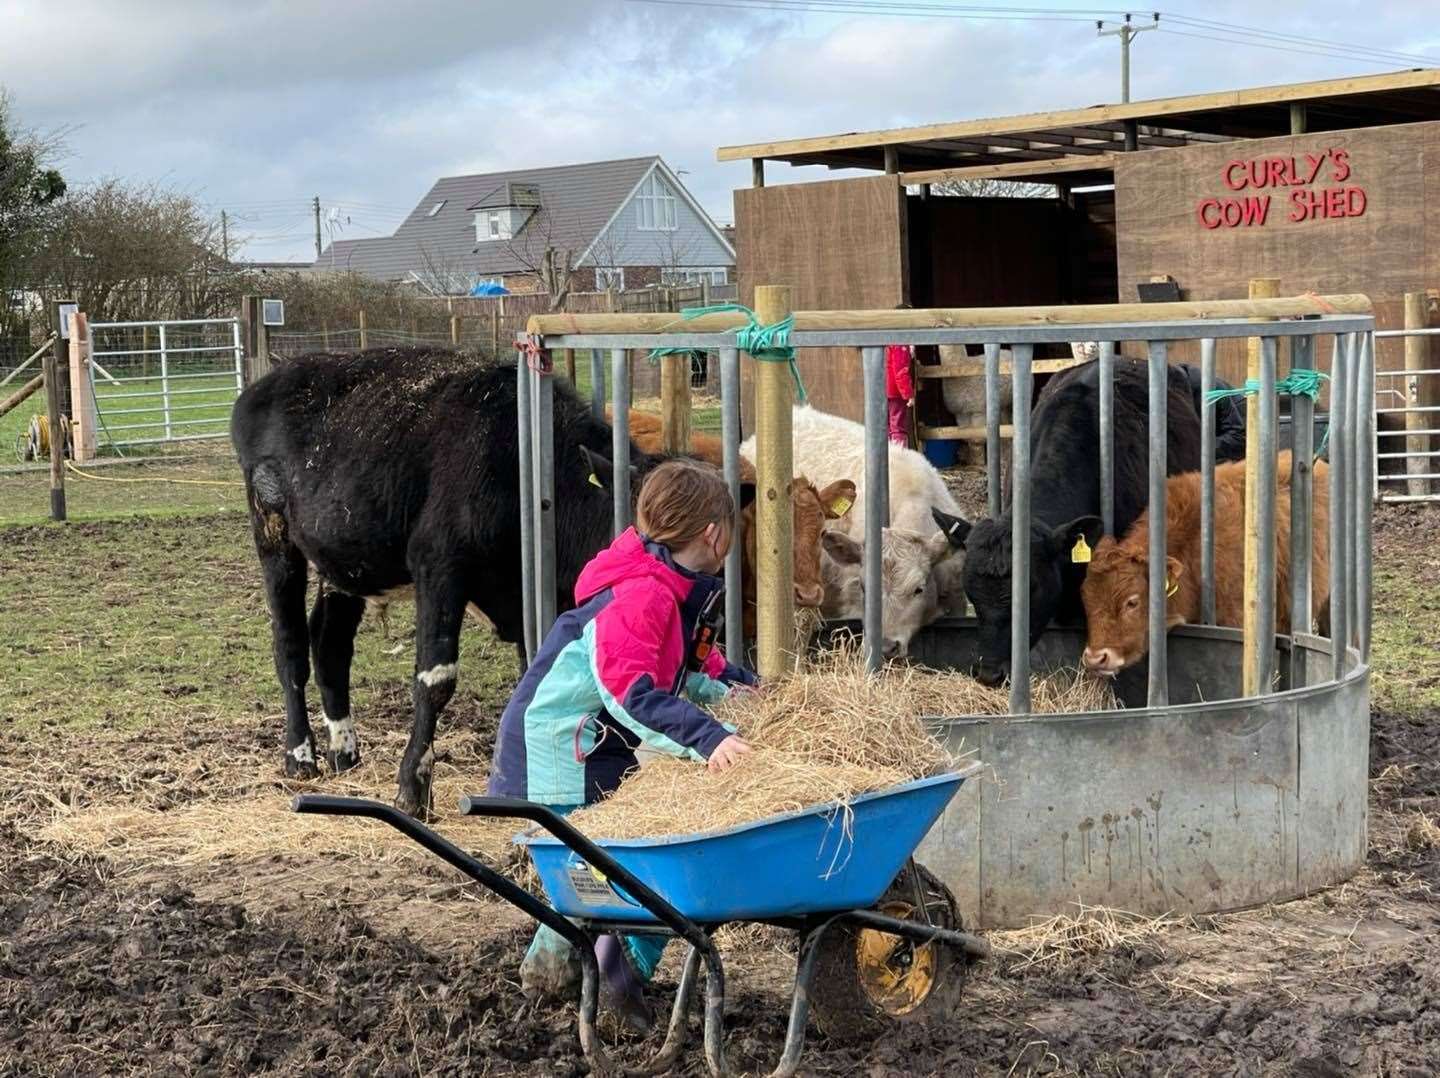 Cattle duties at Curly's Farm, Bayview, Sheppey. Picture: Kyle Ratcliffe